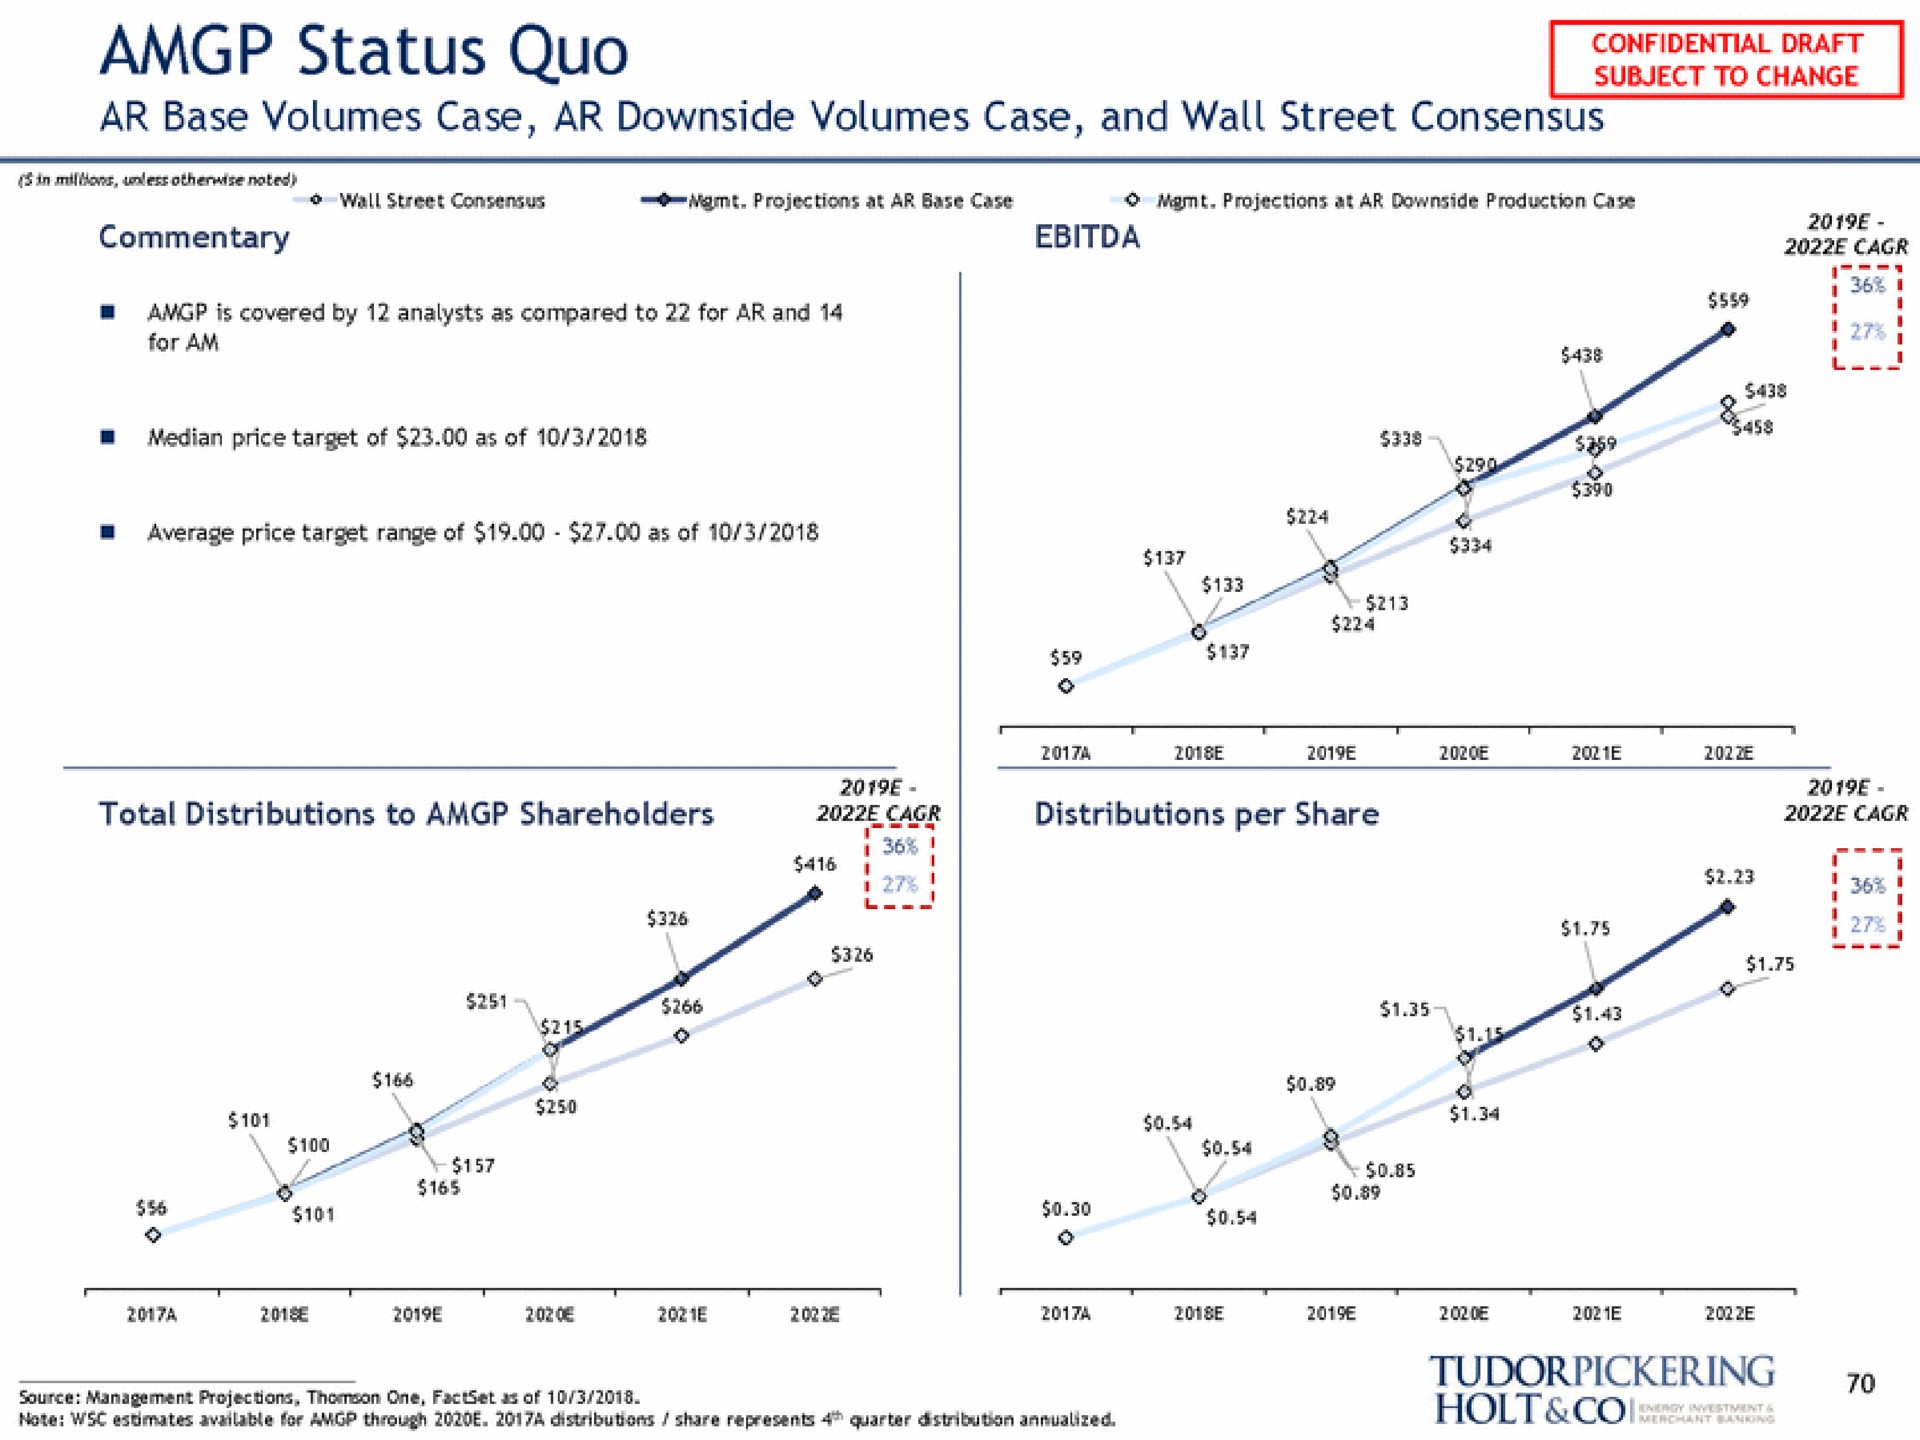 status quo base volumes case downside volumes case and wall street consensus | Tudor, Pickering, Holt & Co